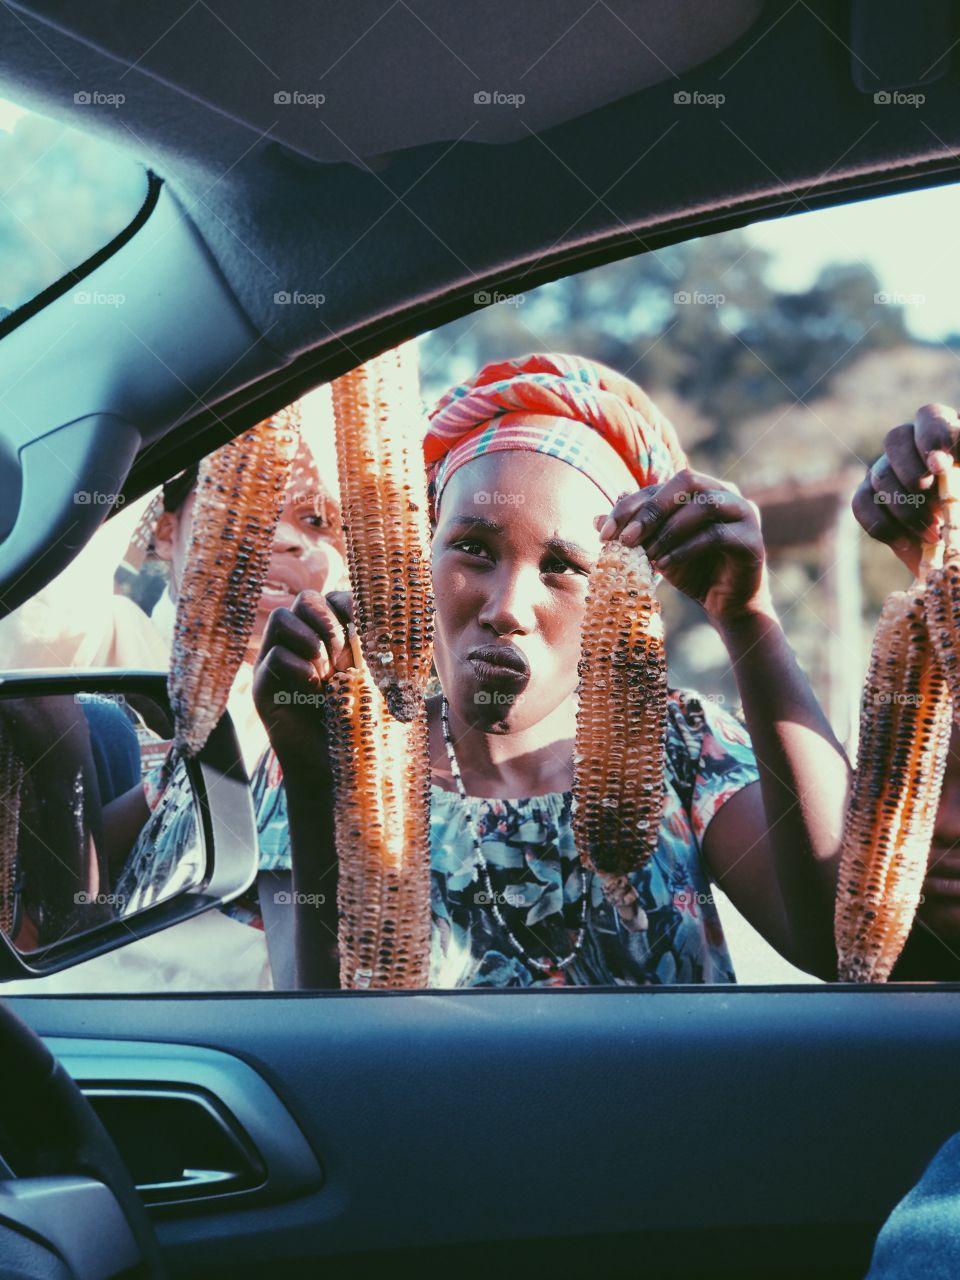 Buying corn in the dusty roadside of the rural Transkei in South Africa 